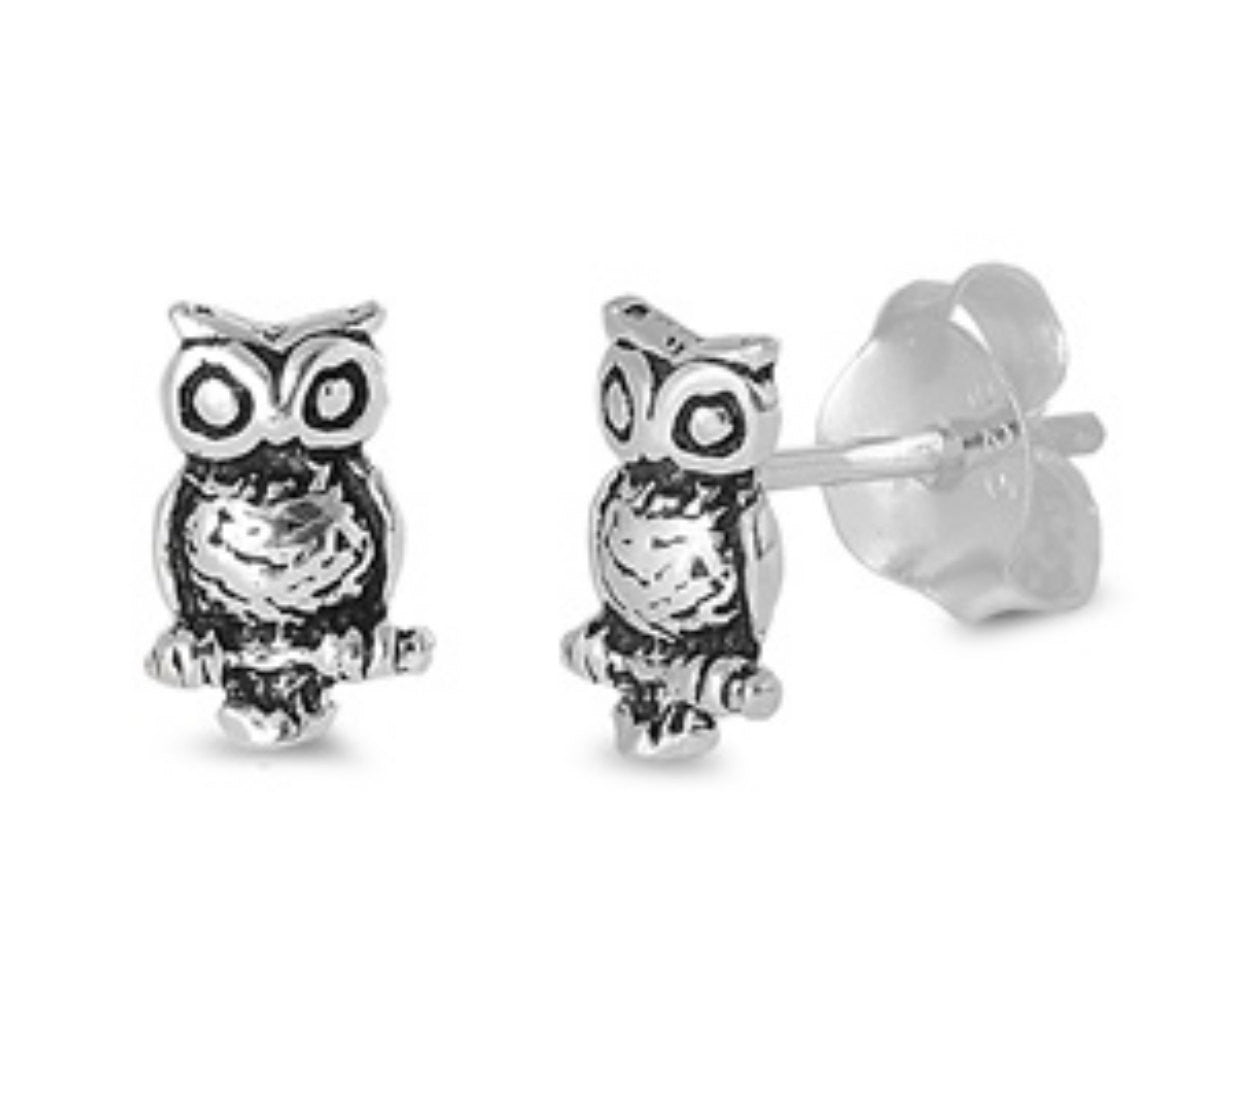 8mm Tiny Owl Cute Stud Post Earring Solid 925 Sterling Silver Oxidized Owl Earrings, Good Luck Gift, Babies, Kids - Blue Apple Jewelry